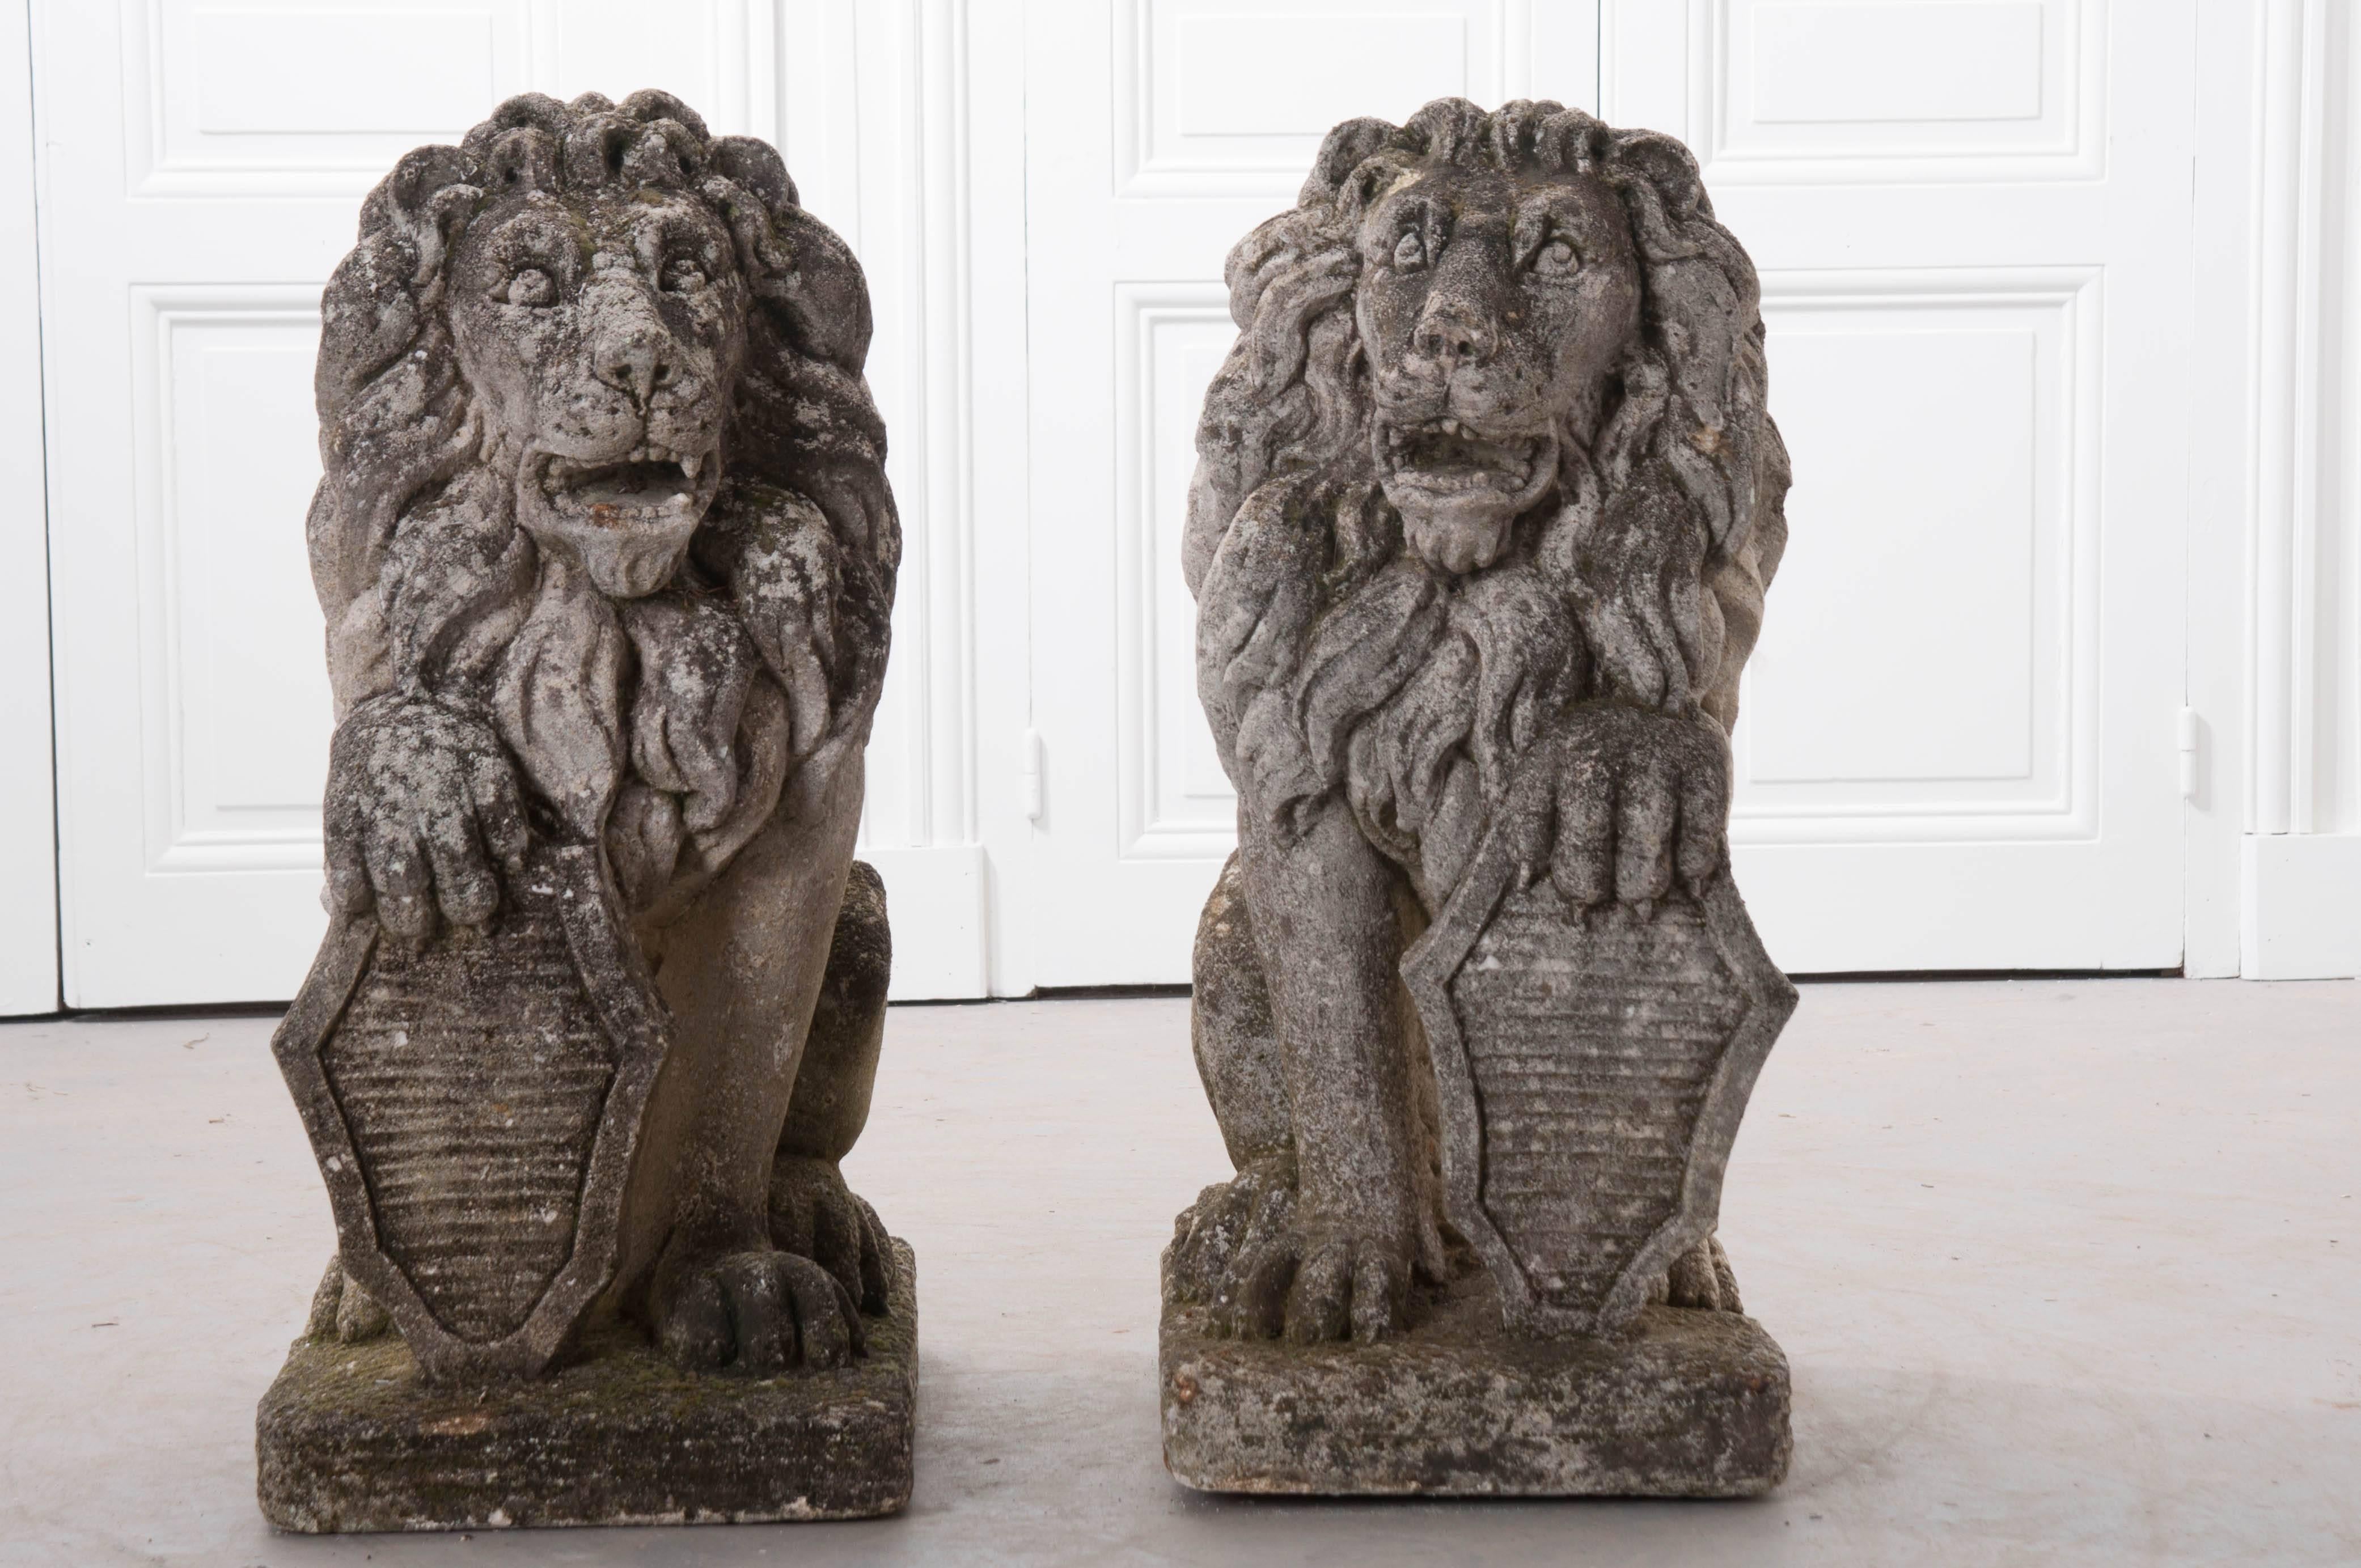 A regal pair of reconstituted stone lions from 19th century, England. These cats are superbly patinated and ready for your garden. Each lion has a wonderfully detailed mane, and is holding a shield. Protect your home with these intimidating sentries